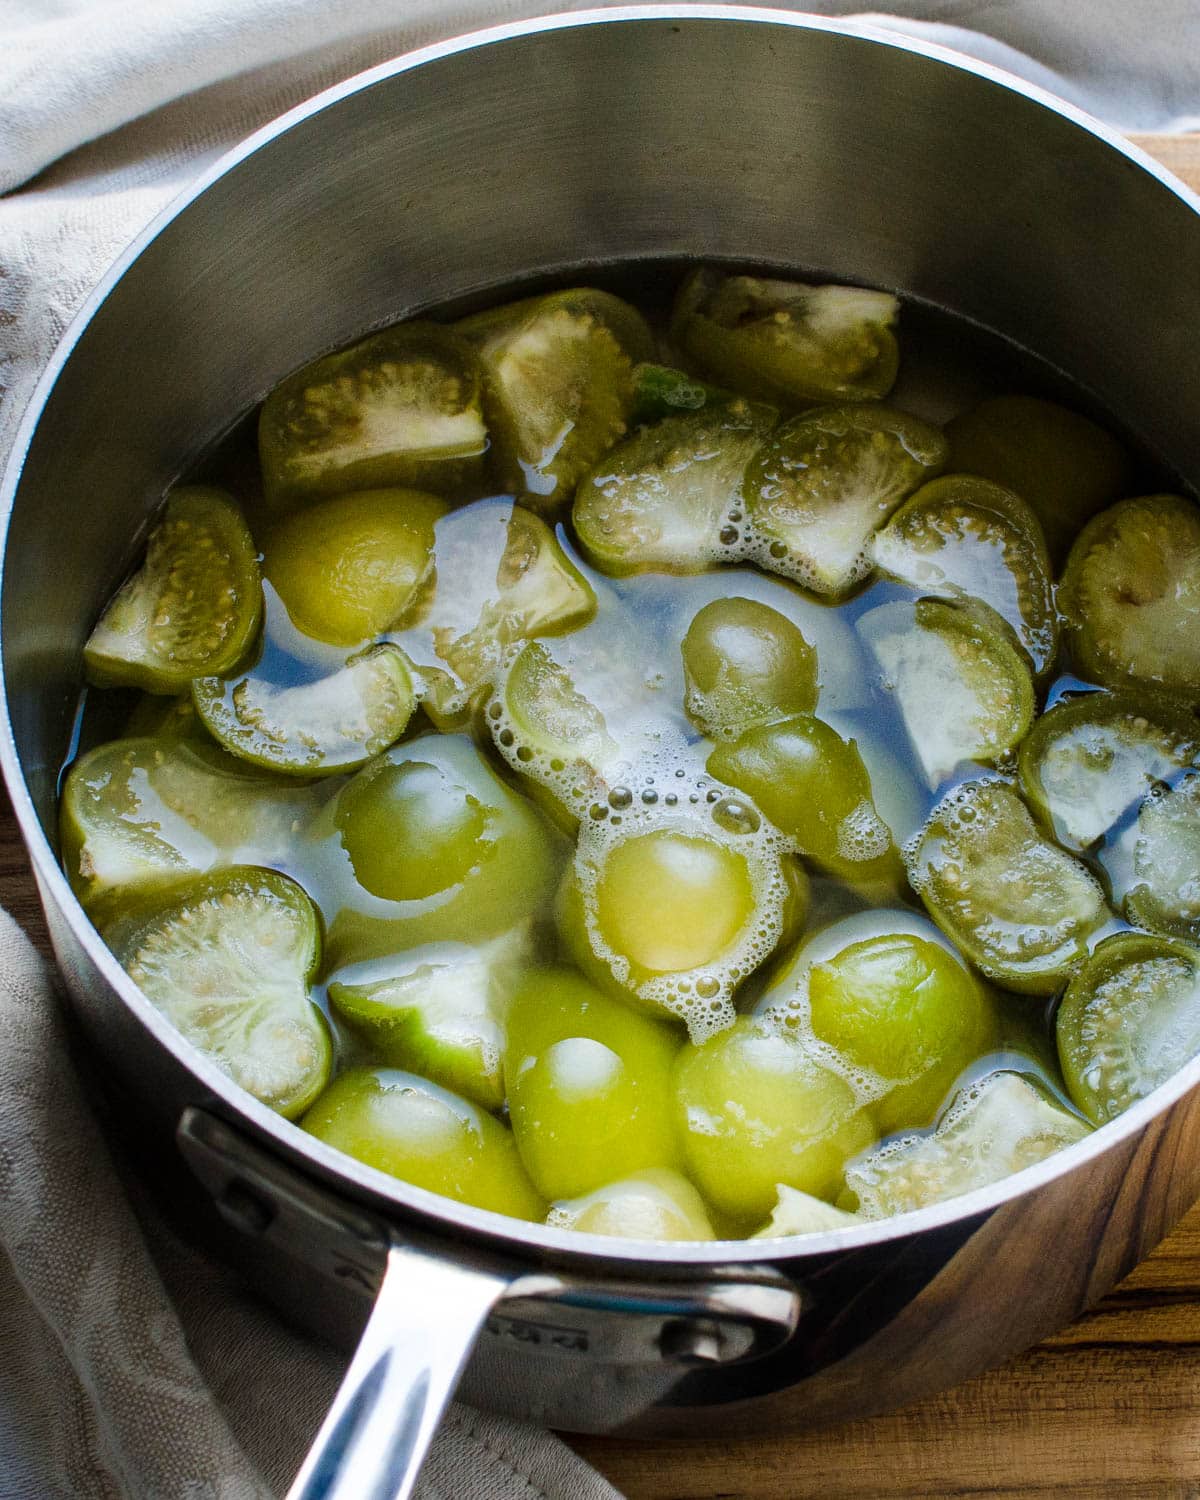 Cooked tomatillos and jalapenos in the saucepan.